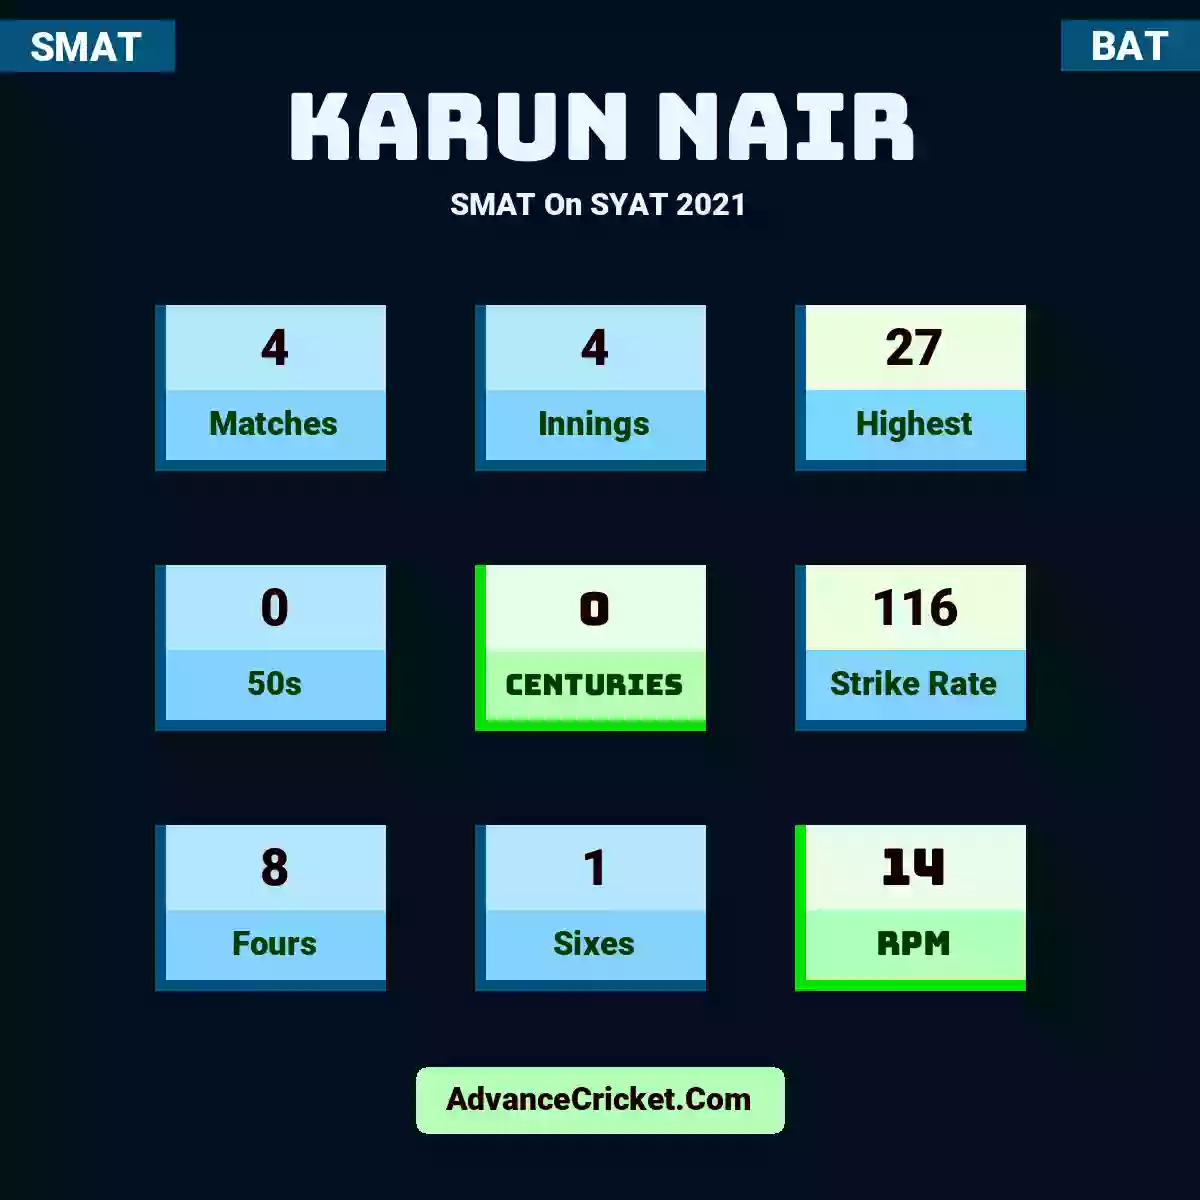 Karun Nair SMAT  On SYAT 2021, Karun Nair played 4 matches, scored 27 runs as highest, 0 half-centuries, and 0 centuries, with a strike rate of 116. K.Nair hit 8 fours and 1 sixes, with an RPM of 14.